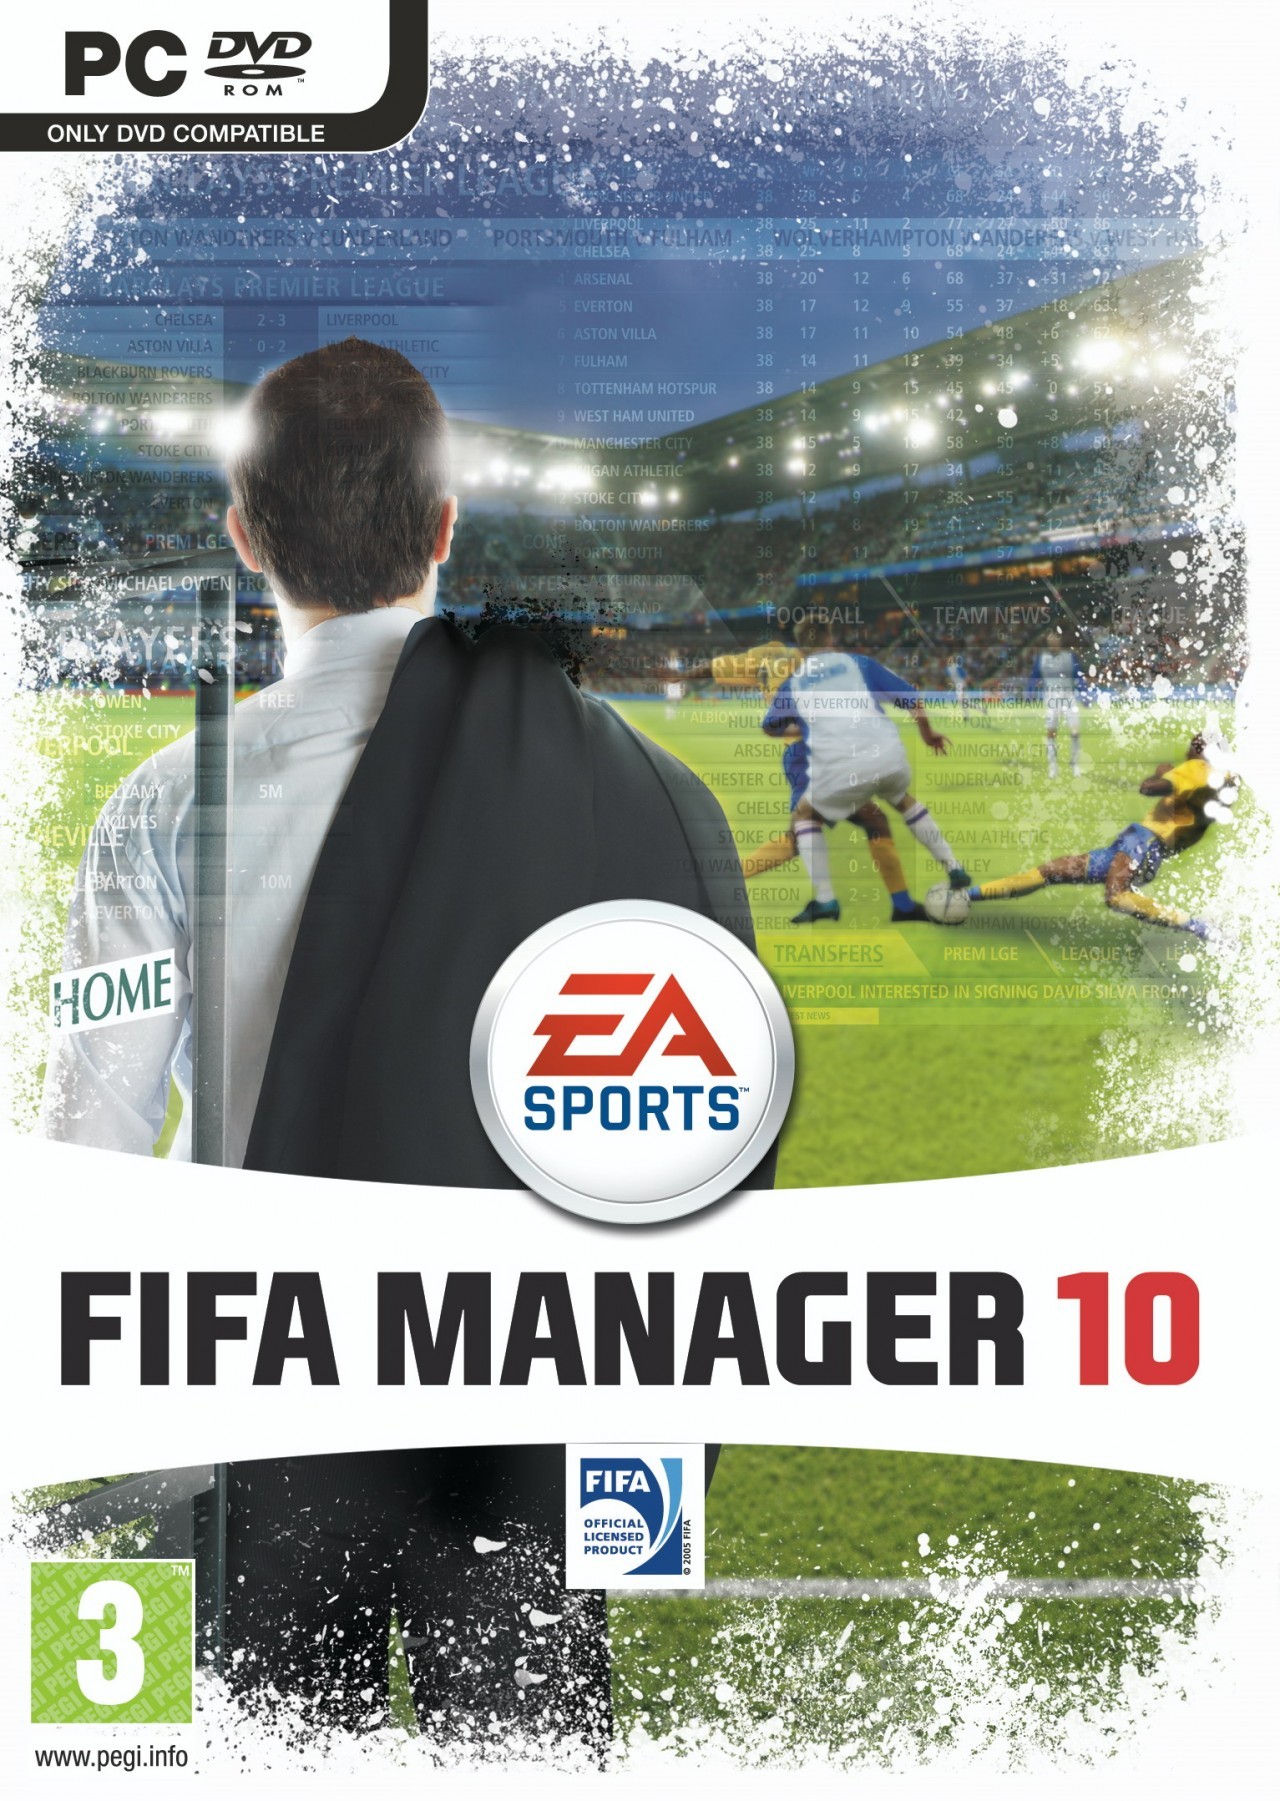 fifa manager 11 activation code